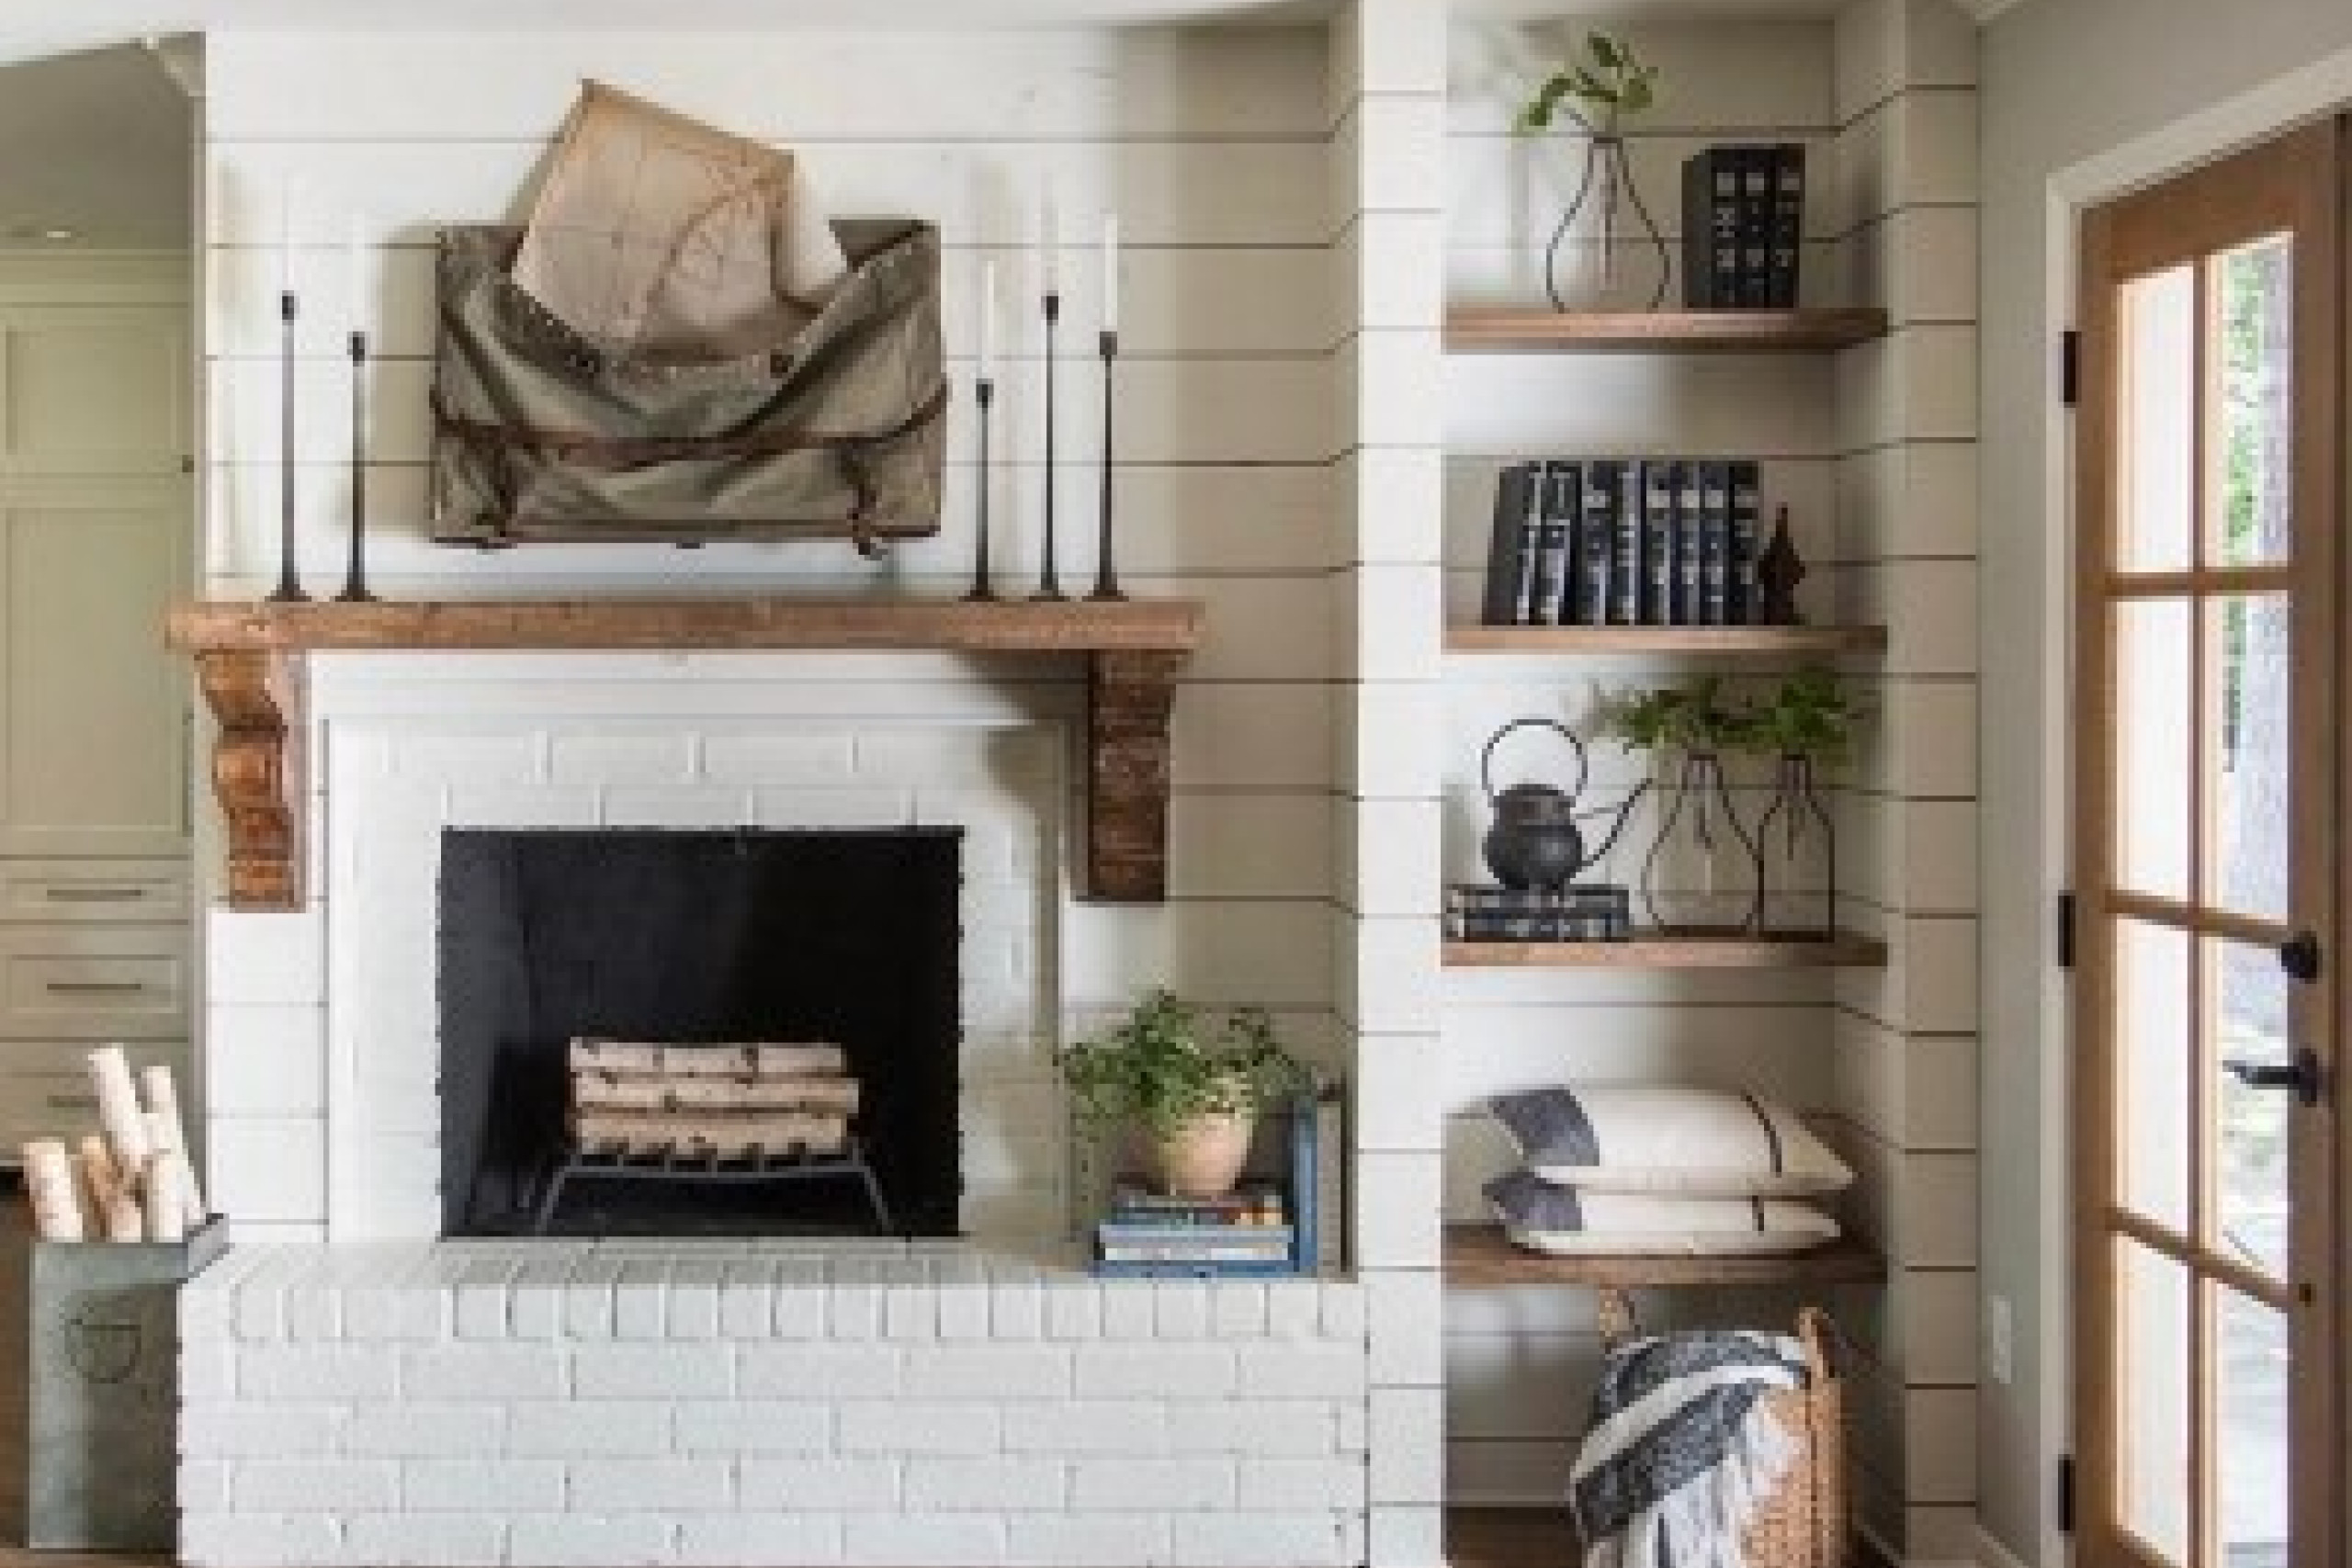 farmhouse-fireplace.-farmhouse-fireplace.-fixer-upper-farmhouse-fireplace.-hgtv-fixer-upper-farmhouse-fireplace-with-shiplap-reclaimed-wood-mantel-painted-brick-and-open-rustic-shelves.jpg